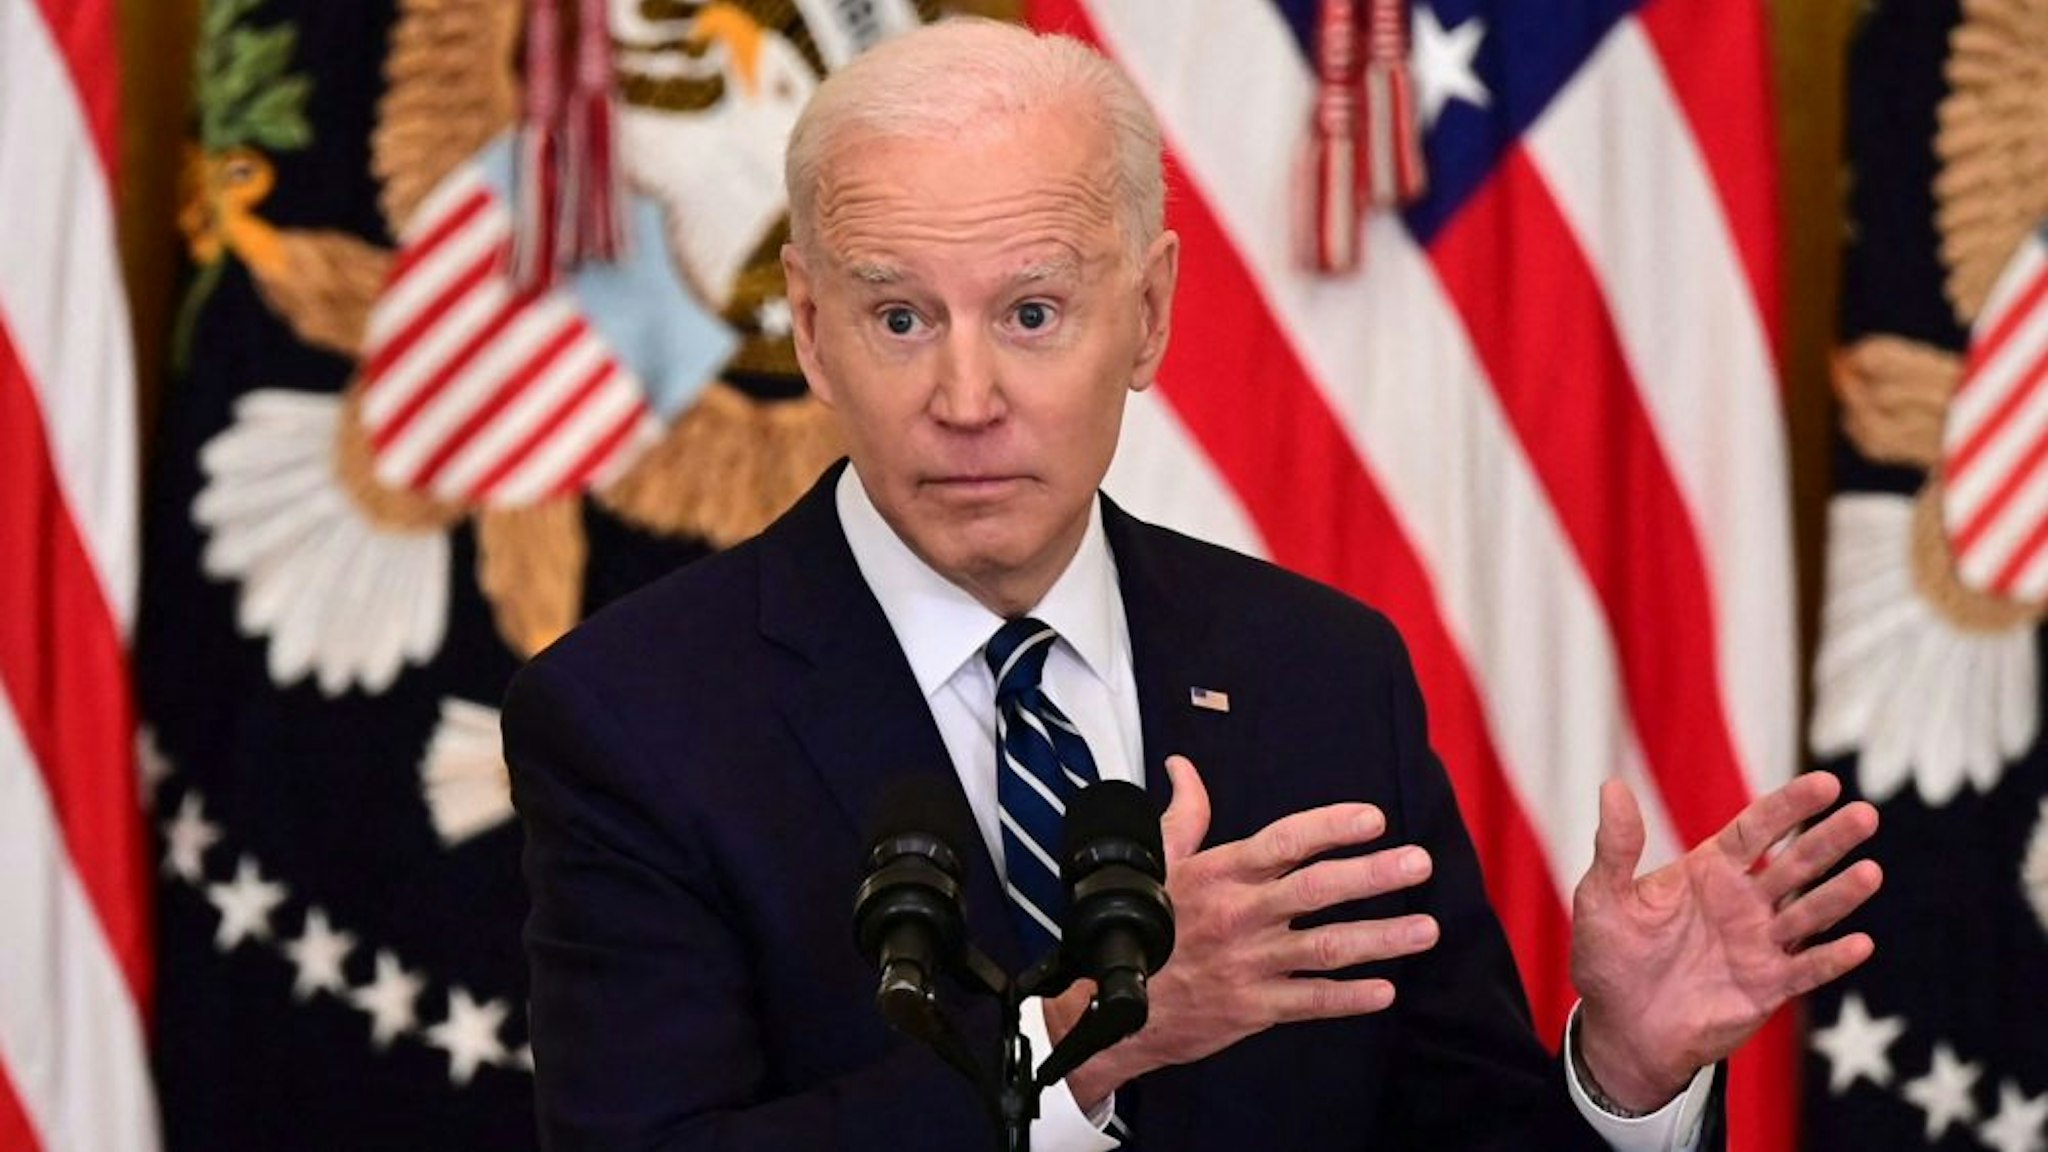 US President Joe Biden answers a question during his first press briefing in the East Room of the White House in Washington, DC, on March 25, 2021. - Biden said Thursday that the United States will "respond accordingly" if North Korea escalates its missile testing.